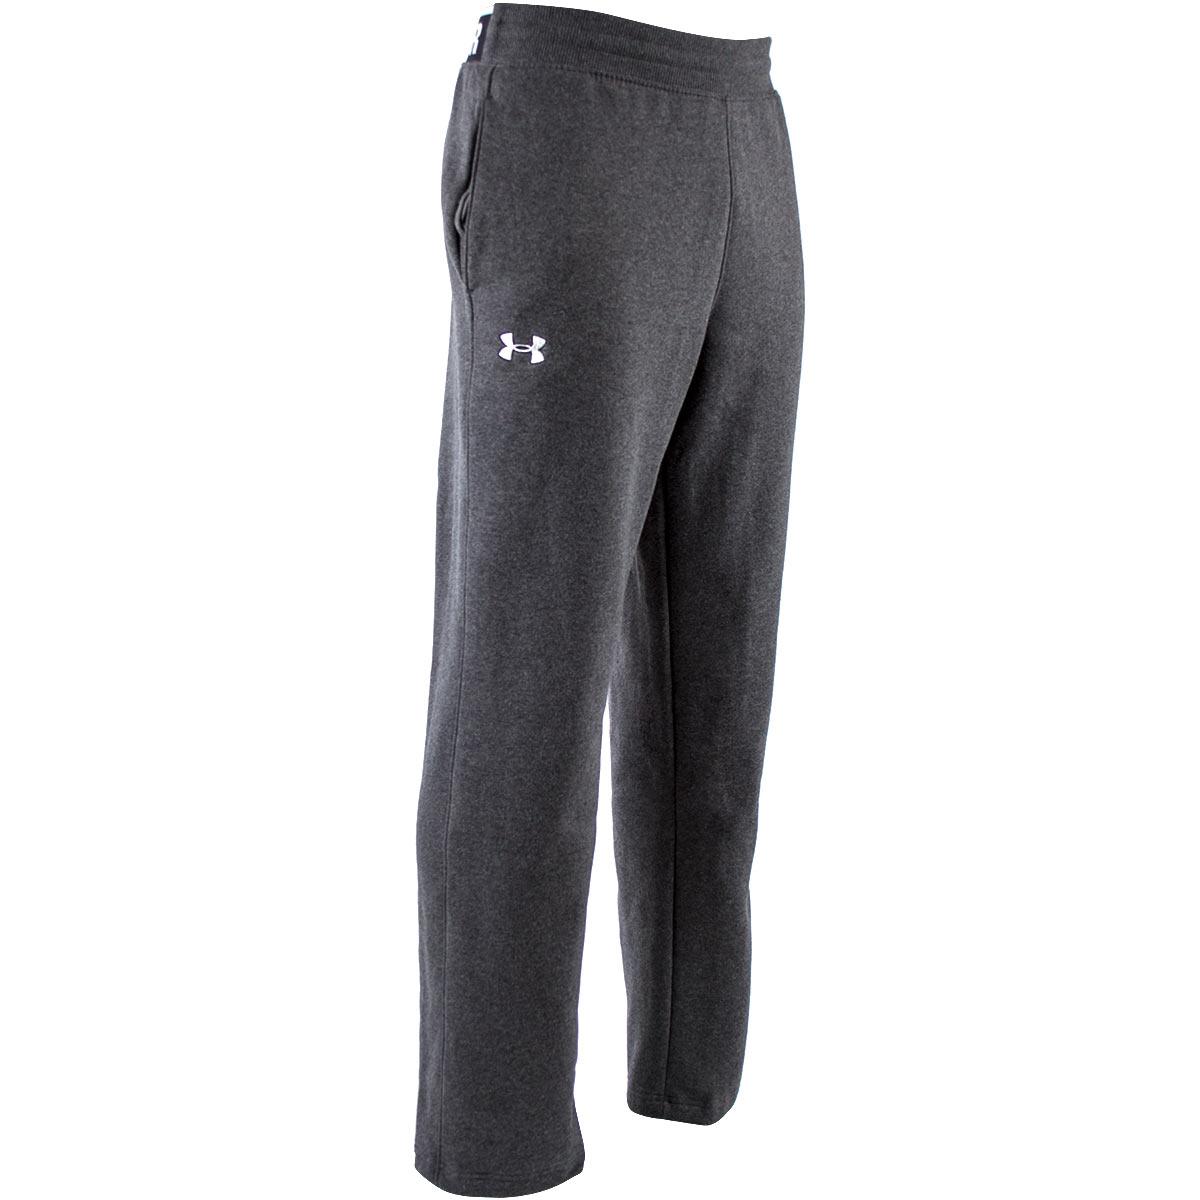 Under Armour Storm Cotton Uncuffed Pant Herren Fitness Hose Sporthose